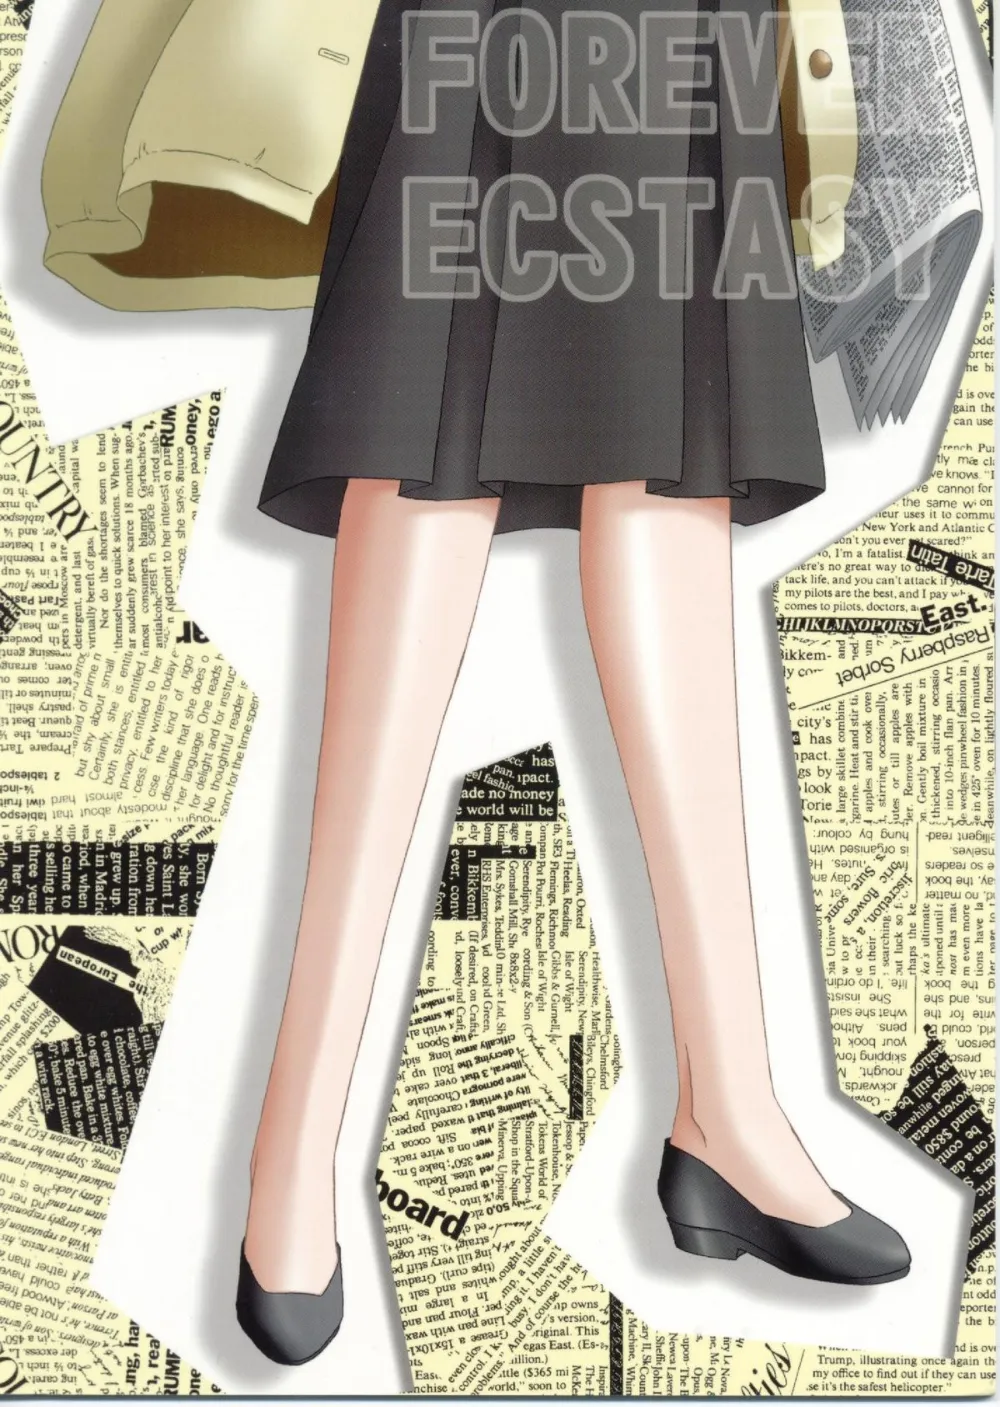 Read Or Die,Forever Ecstacy [Japanese][第2页]